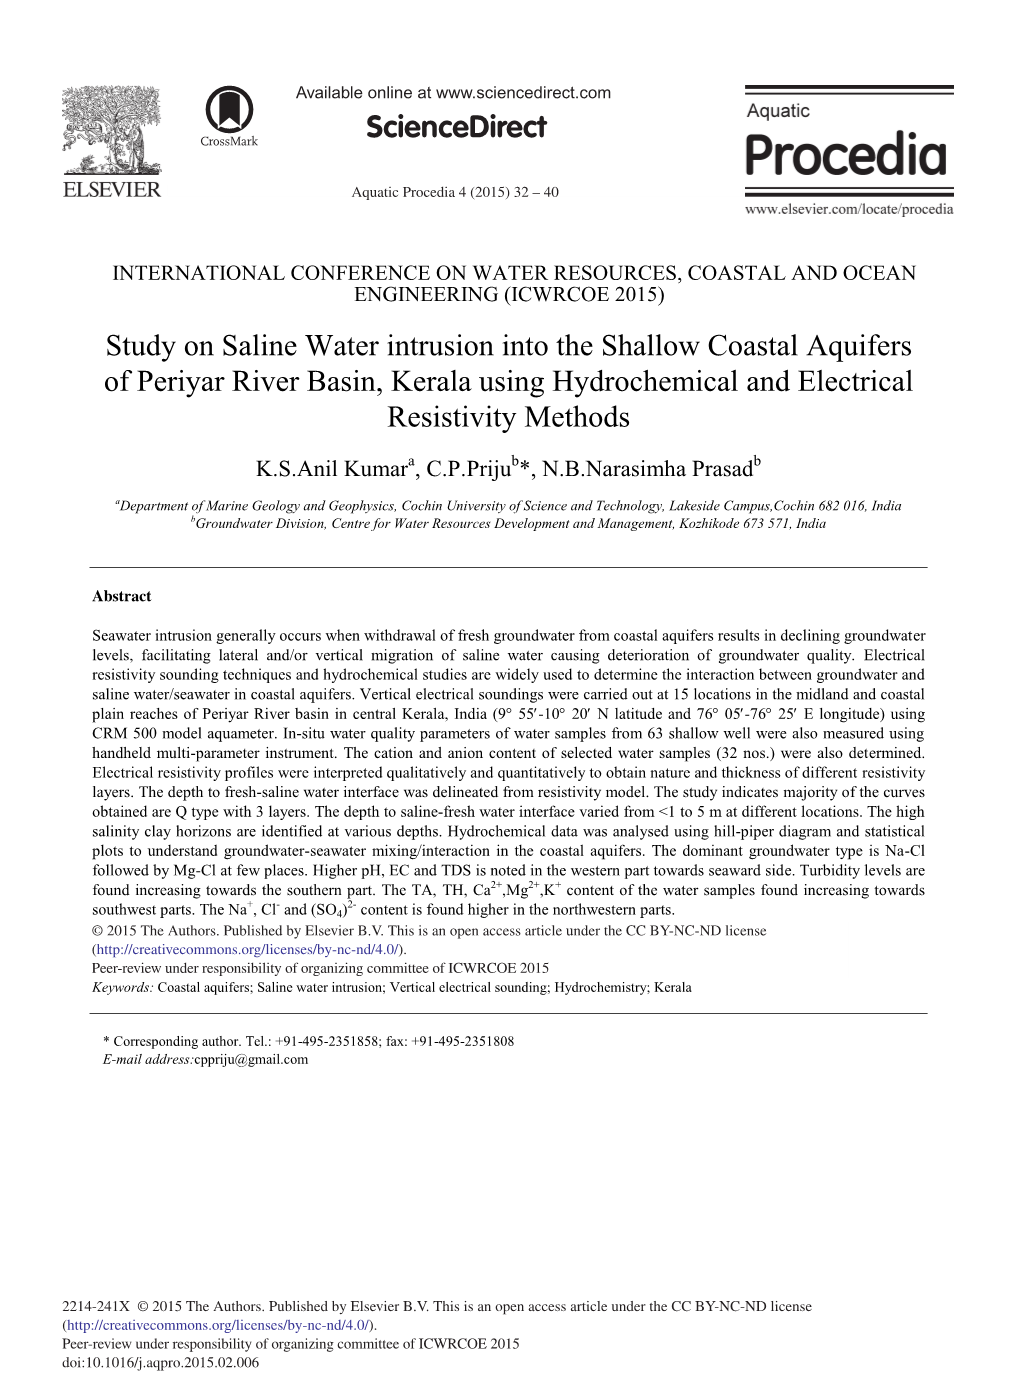 Study on Saline Water Intrusion Into the Shallow Coastal Aquifers of Periyar River Basin, Kerala Using Hydrochemical and Electrical Resistivity Methods